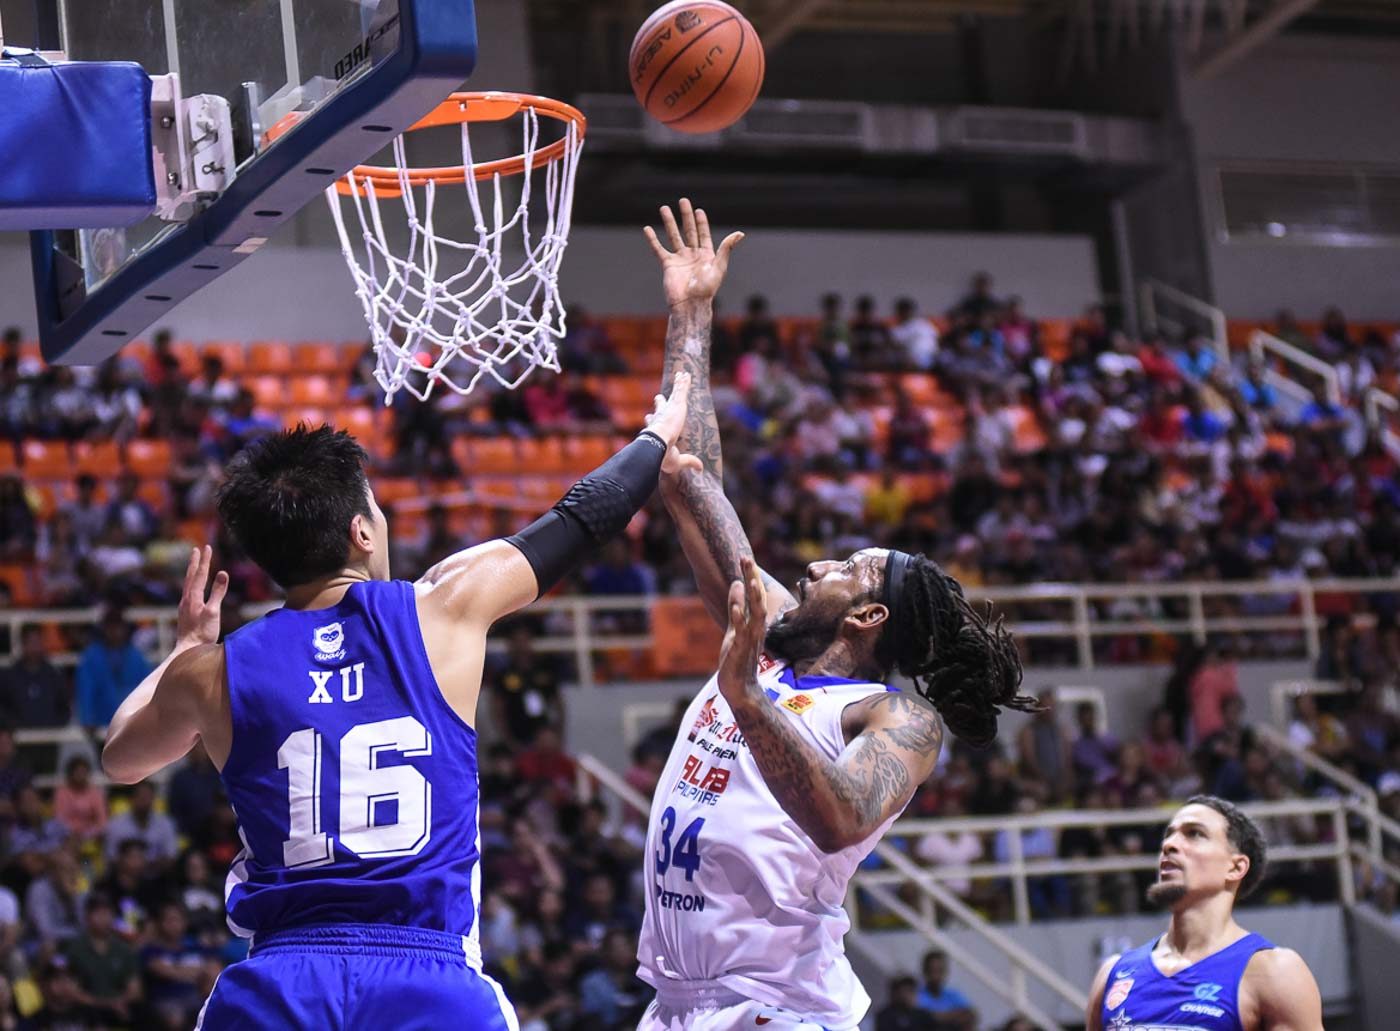 Alab Pilipinas clamps Hong Kong anew for 7th straight win